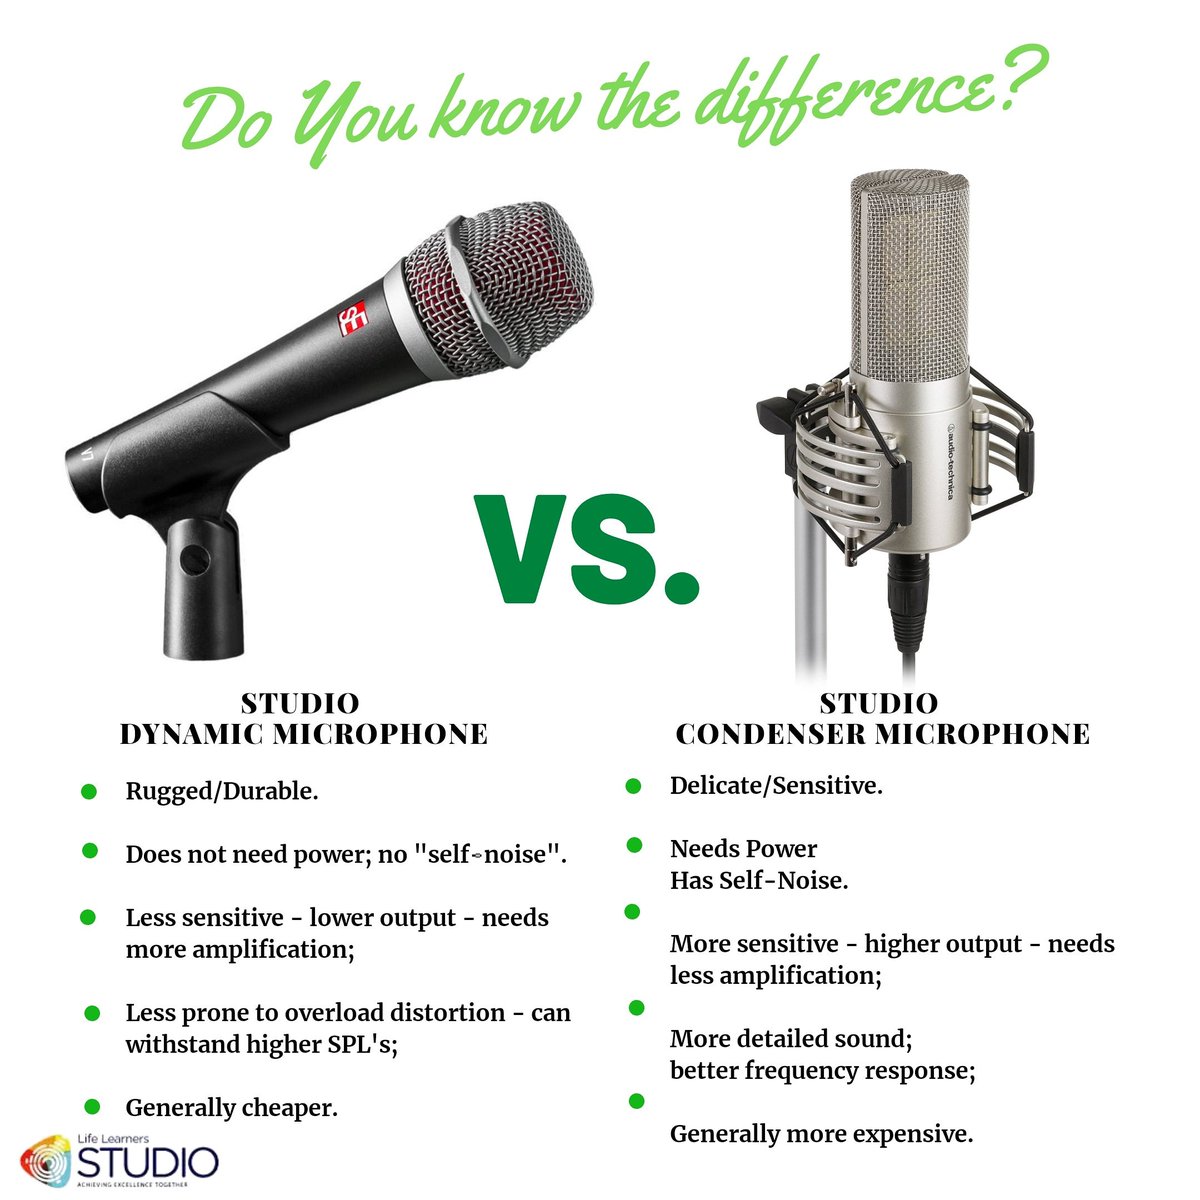 Do you know the difference between a #dynamicmic and #condensermic? Check out the difference and their purpose.
.
#lifeshow #studiolife #musicproduction #audioengineering #newproduct #mobileapp #abuja #testar #technology #elearning #steam #stem #machinelearning #bigdata #IoT